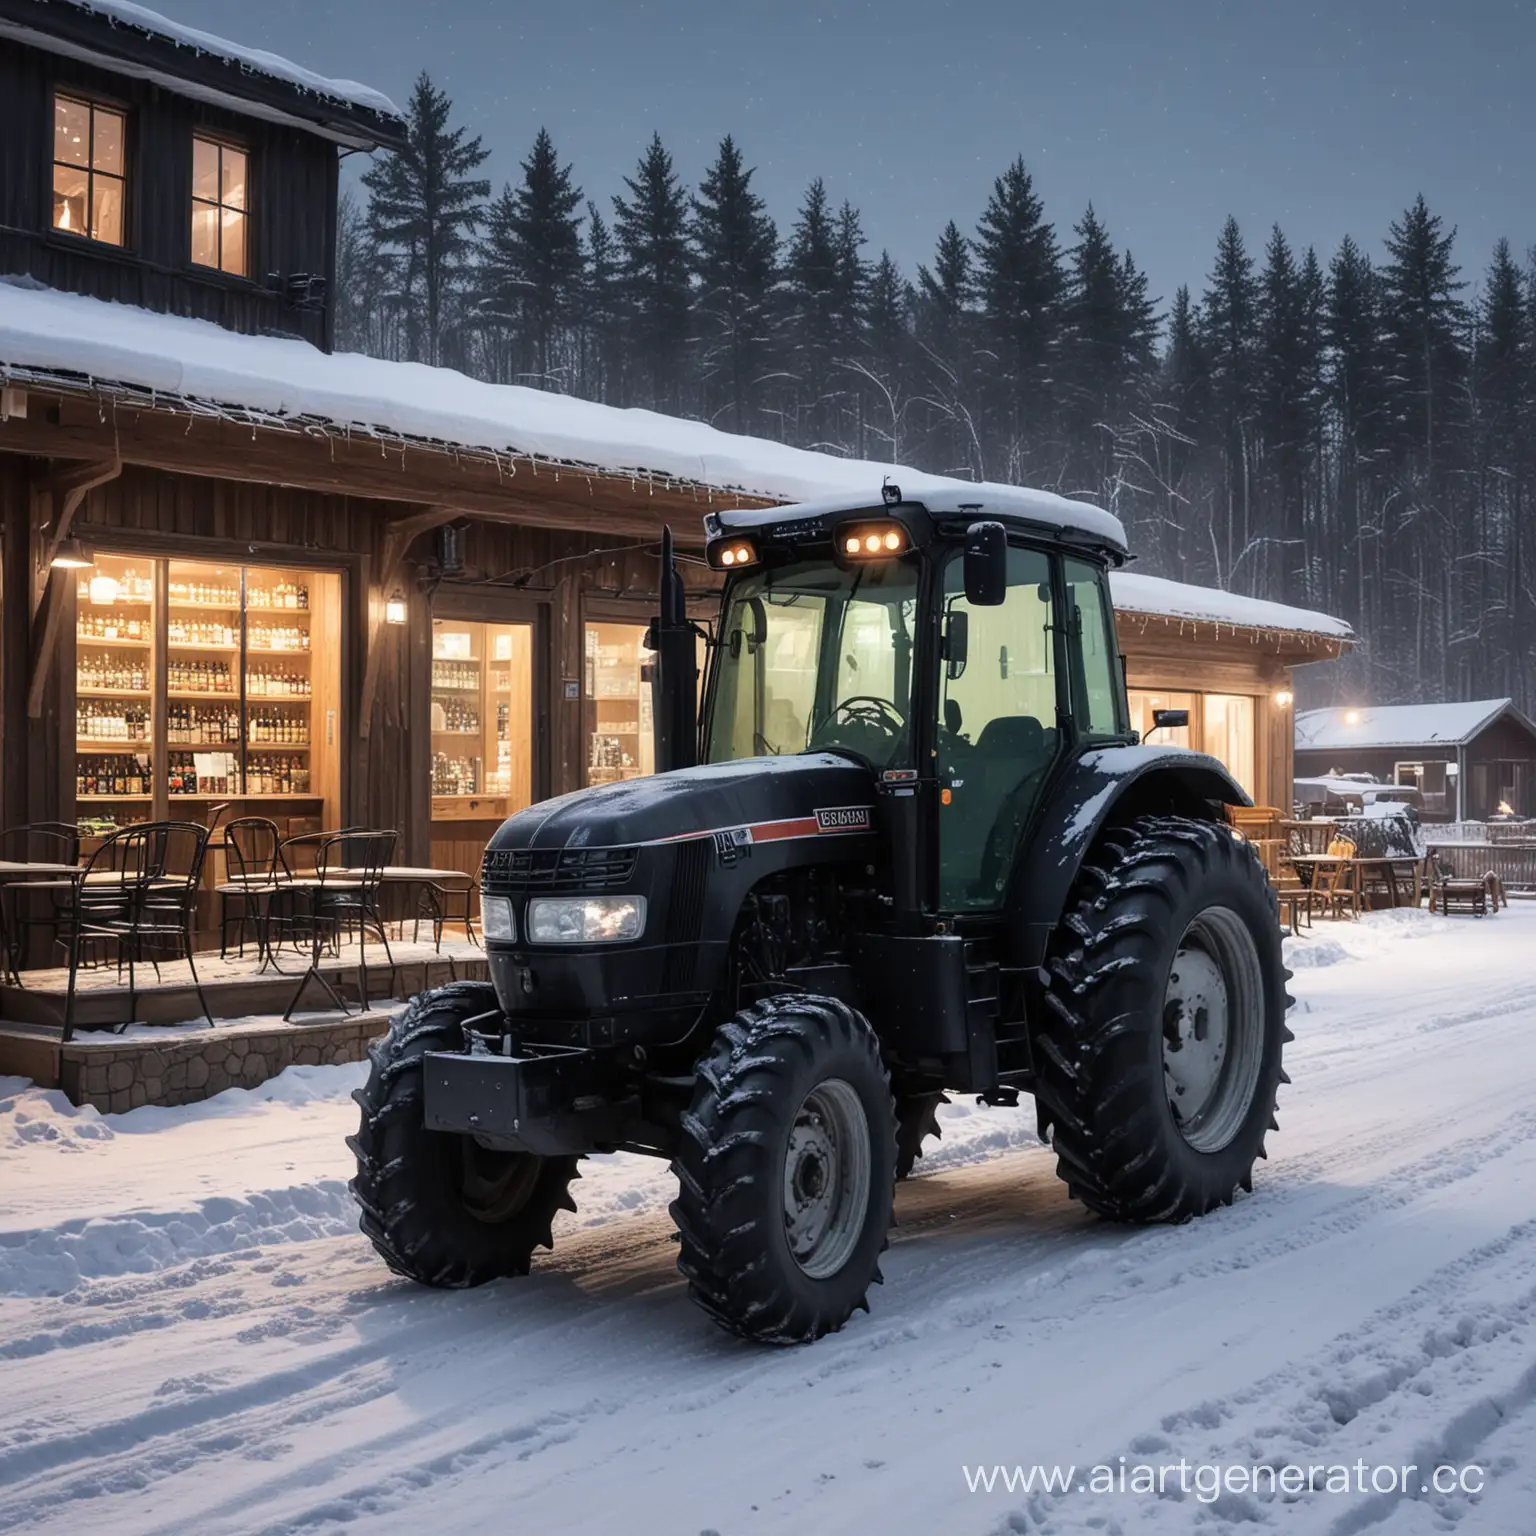 Black-Tractor-Next-to-Beer-Shop-with-Forest-and-Snowdrifts-in-Almost-Spring-Night